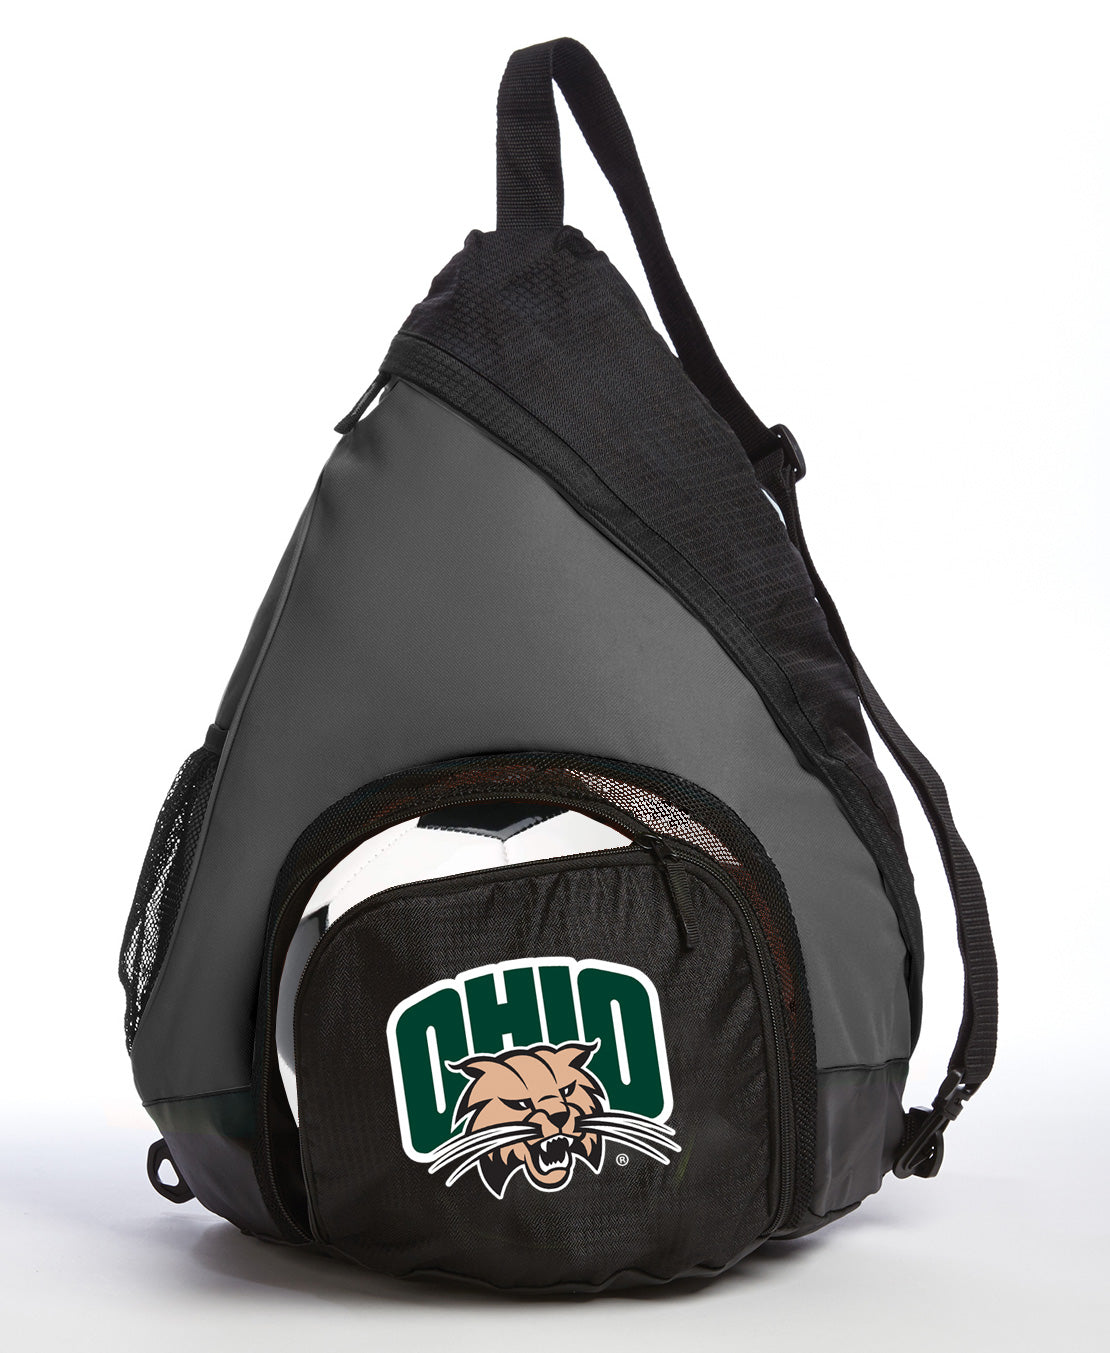 Ohio University Sling Backpack Ohio Bobcats Bag with Soccer Ball or Volleyball Bag Sports Gear Compartment Practice Bag